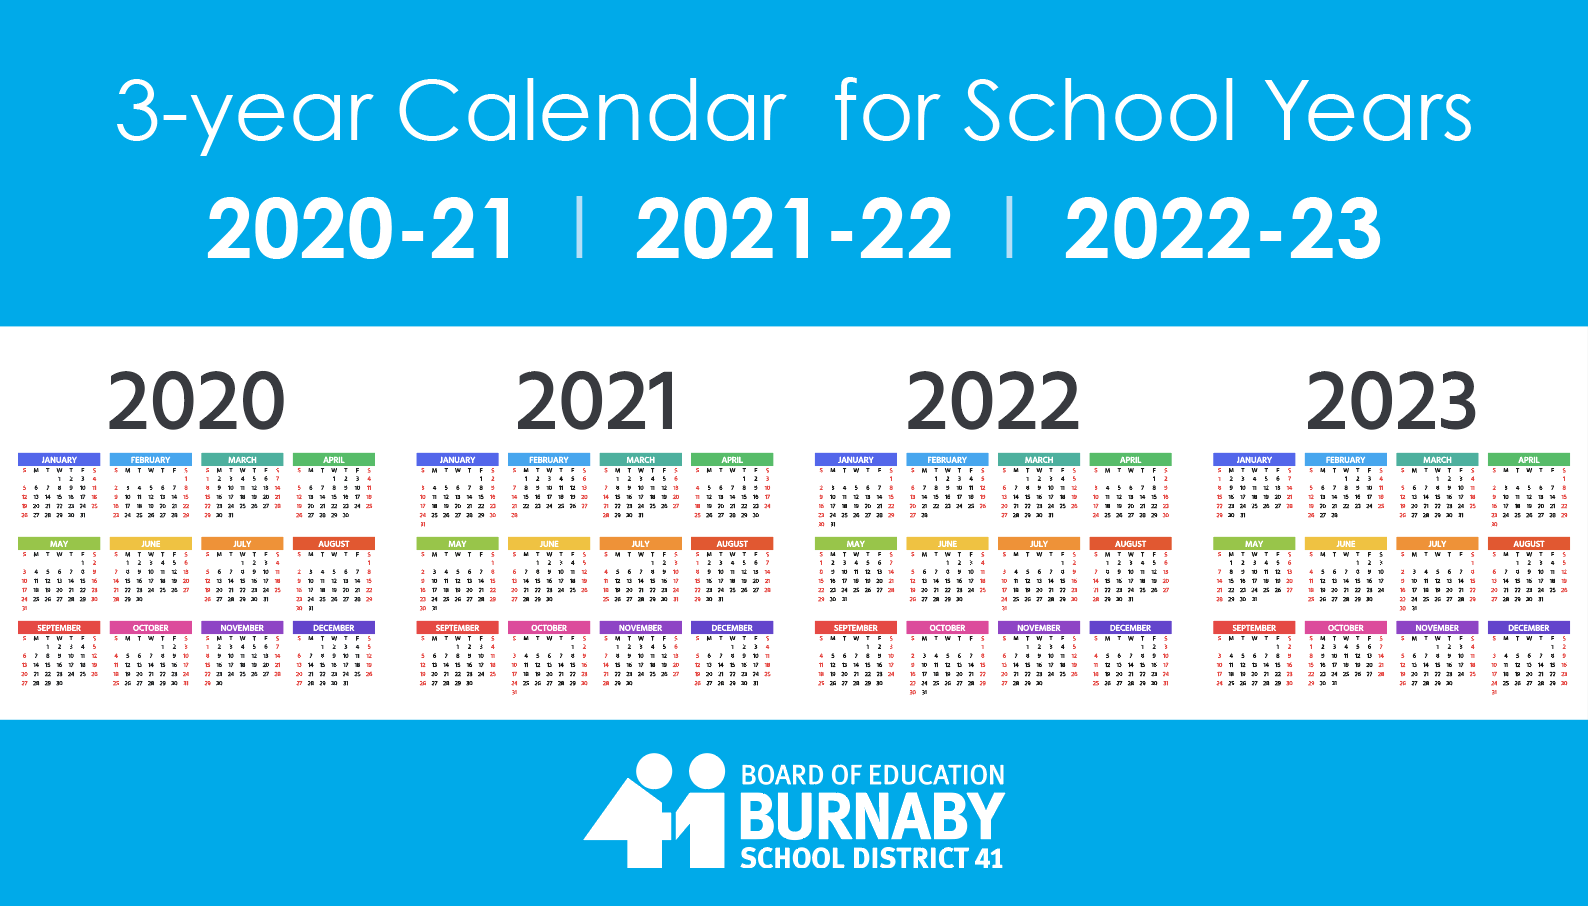 3-yearCalendar_2019-12-02 at 1.12.44 PM - Burnaby Schools